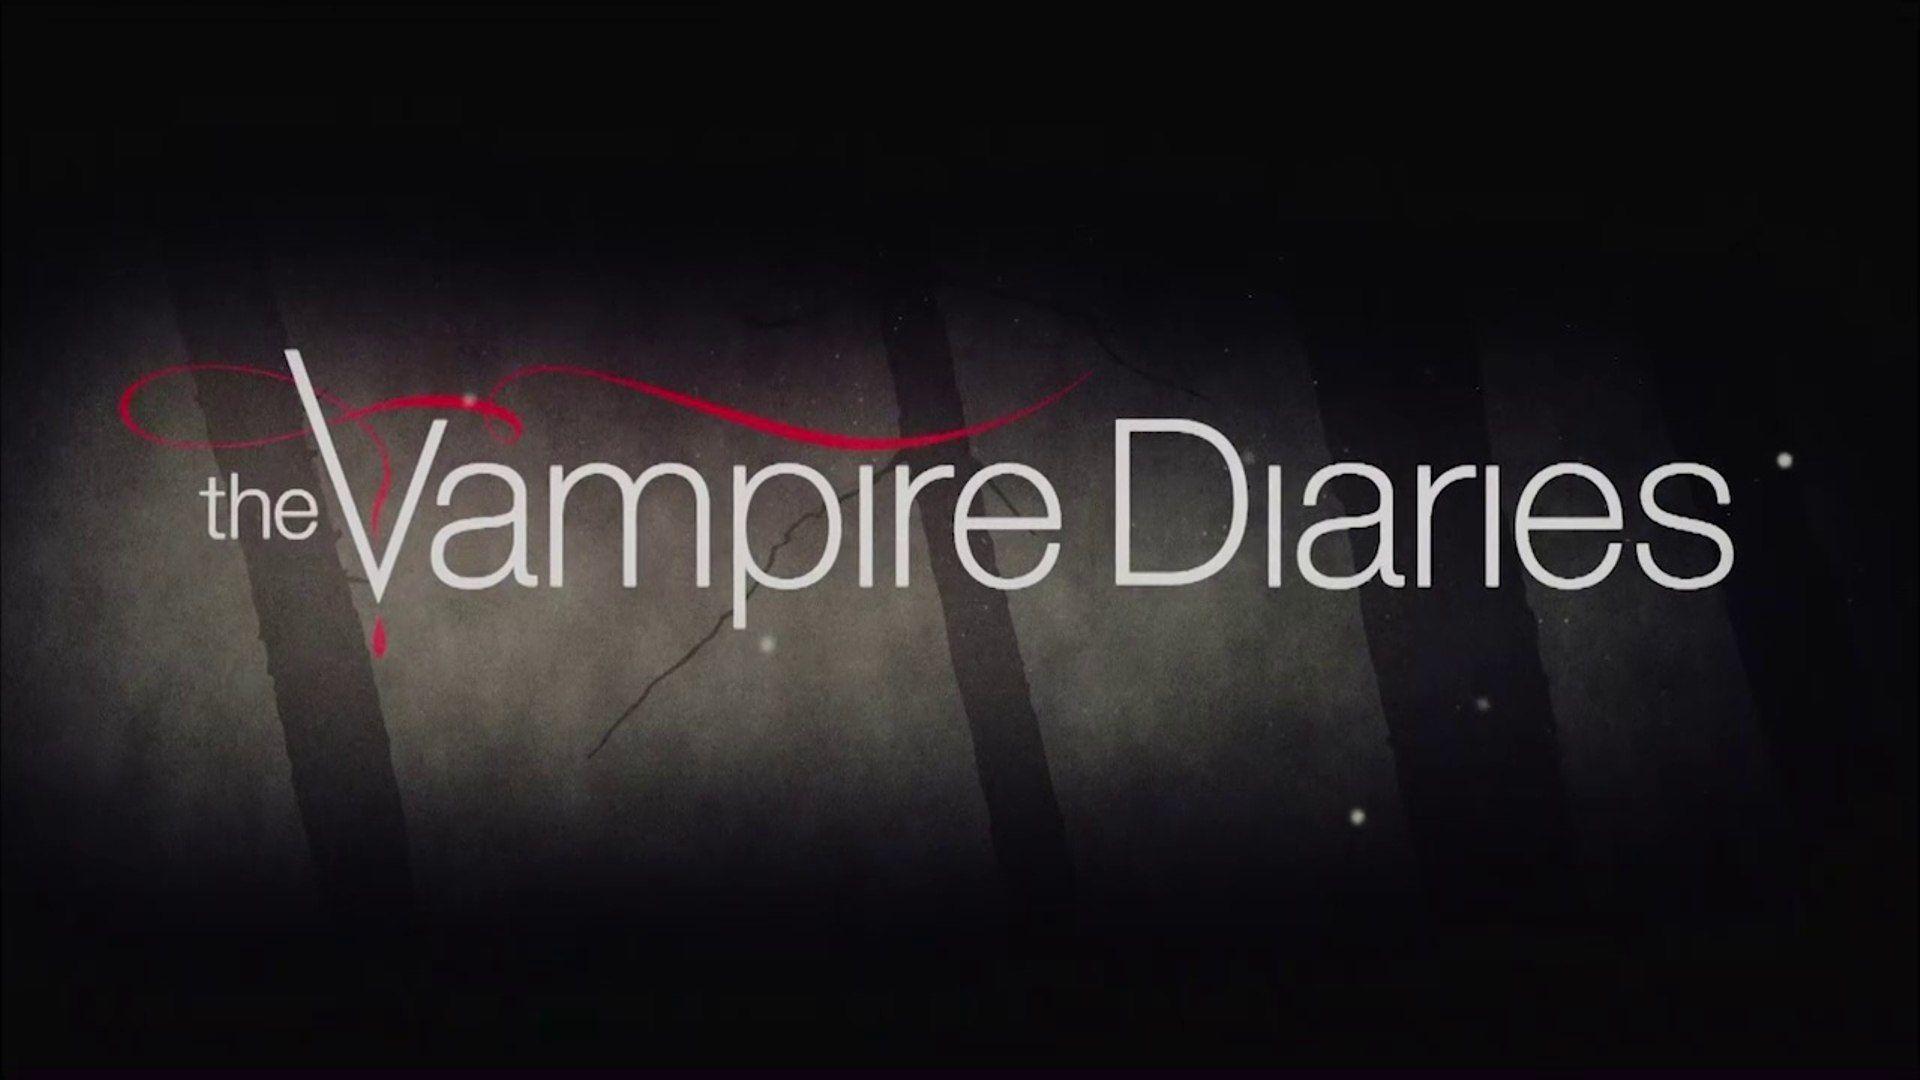 The Vampire Diaries Logo - The Vampire Diaries After Show Season 6 Episode 3 